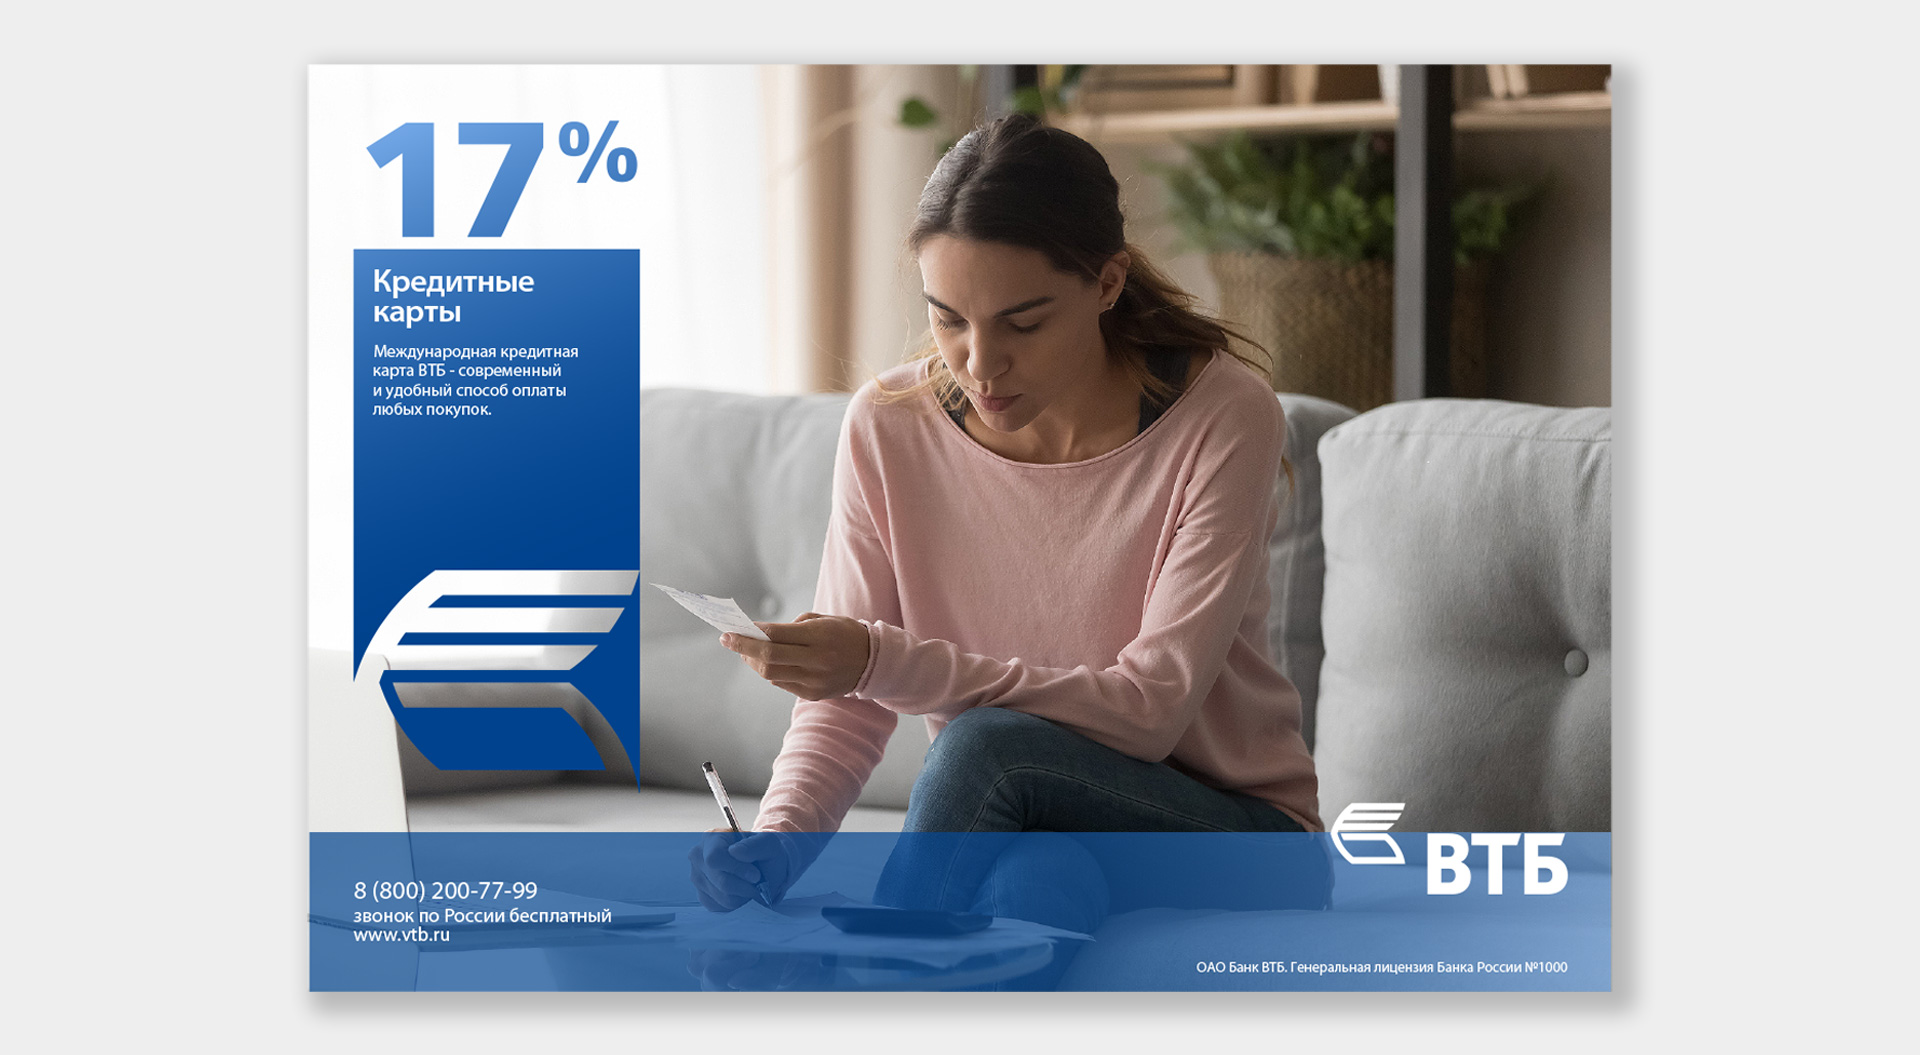 VTB Bank express branch and advertising communications home mortgage poster